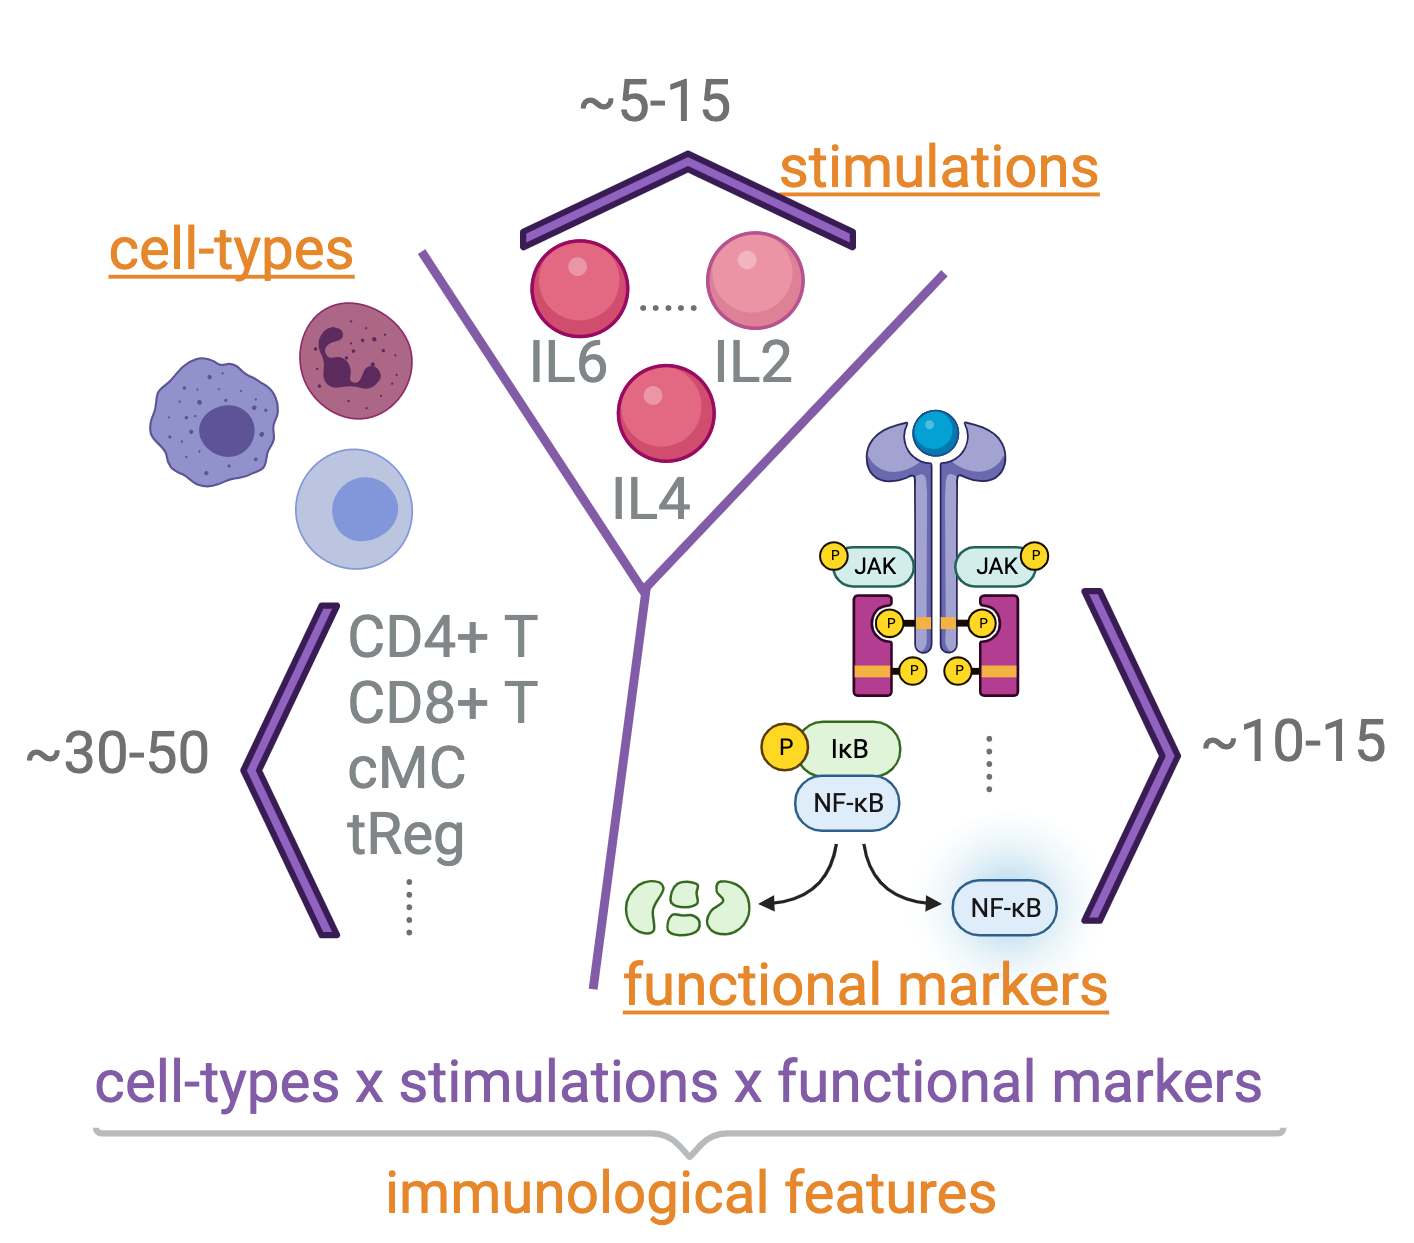 Immune cell types, stimulations, and functional markers all contribute to the immunological features being analyzed by Stanley’s project